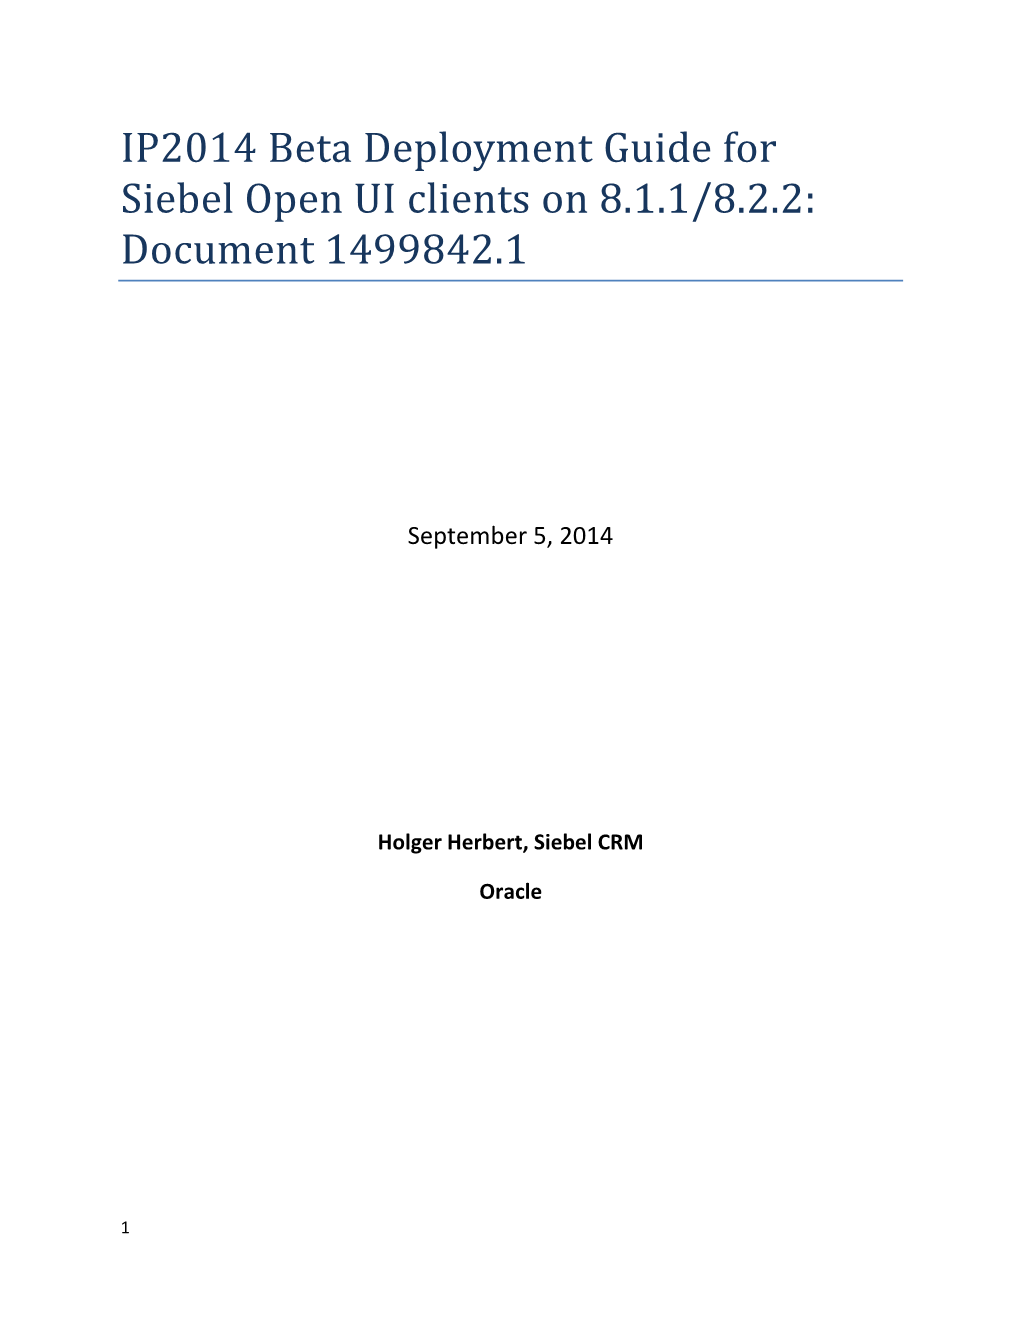 IP2014 Beta Deployment Guide for Siebel Open UI Clients on 8.1.1/8.2.2: Document 1499842.1